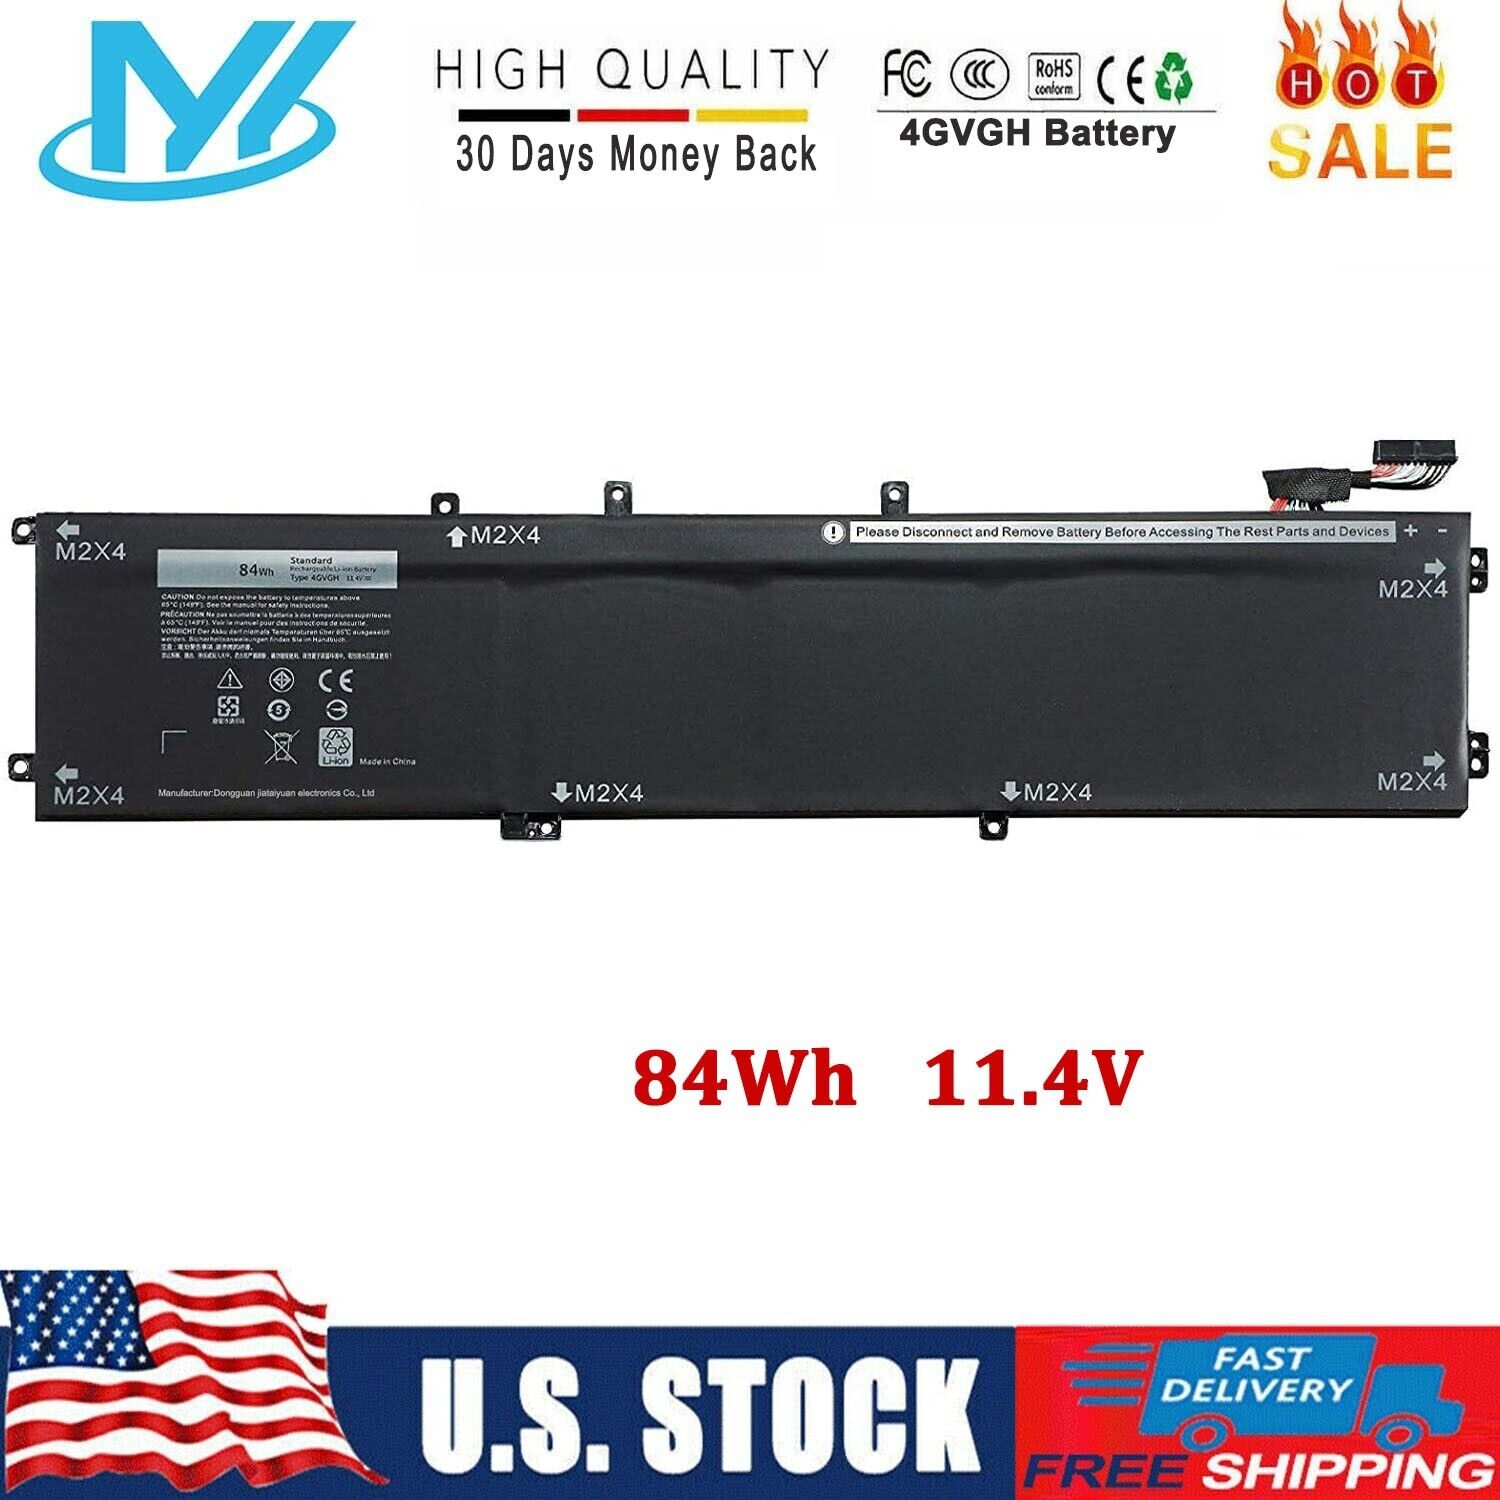 84Wh 4GVGH Battery For Dell Precision 5510 XPS 15 9550 Series T453X 1P6KD 0T453X